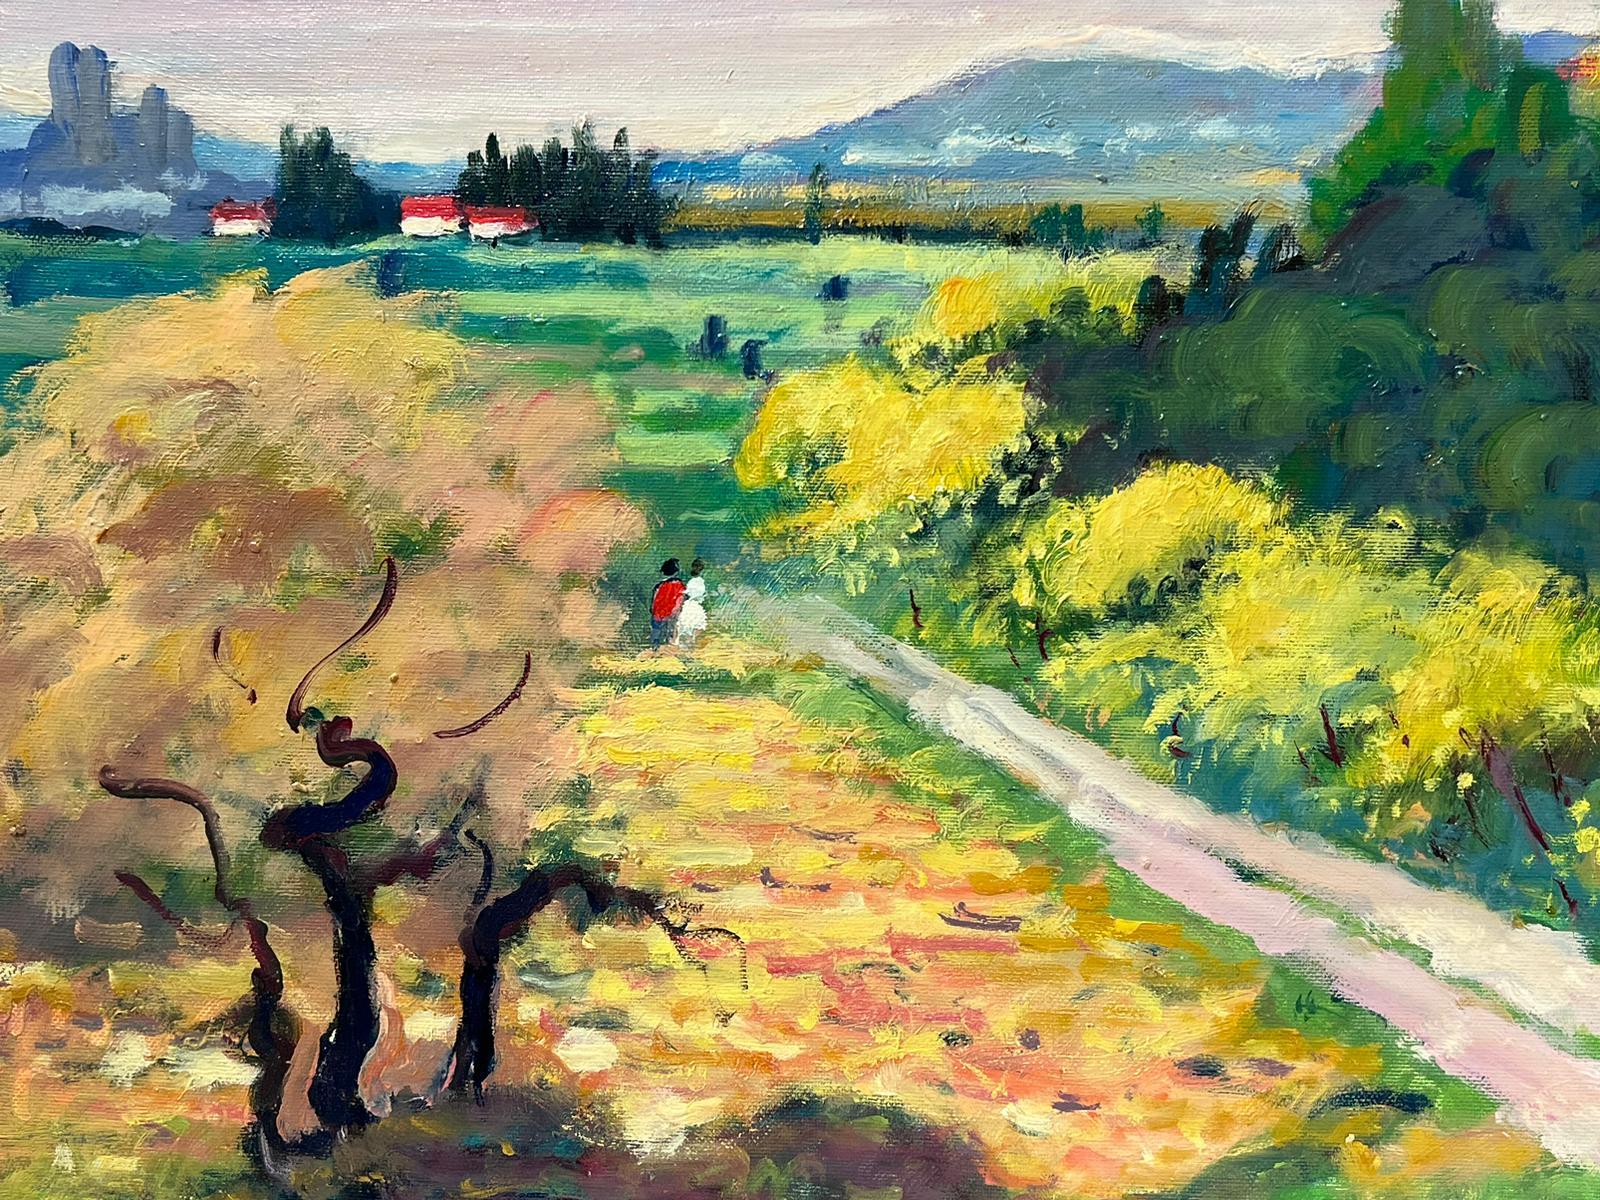 Artist/ School: Guy Benard (French b.1928) signed lower corner. Painter from Rouen, Normandy, exhibited throughout France. 

Title: Provence

Medium:  signed oil on canvas, unframed and inscribed verso

size: 18 x 21.5 inches

Provenance: private